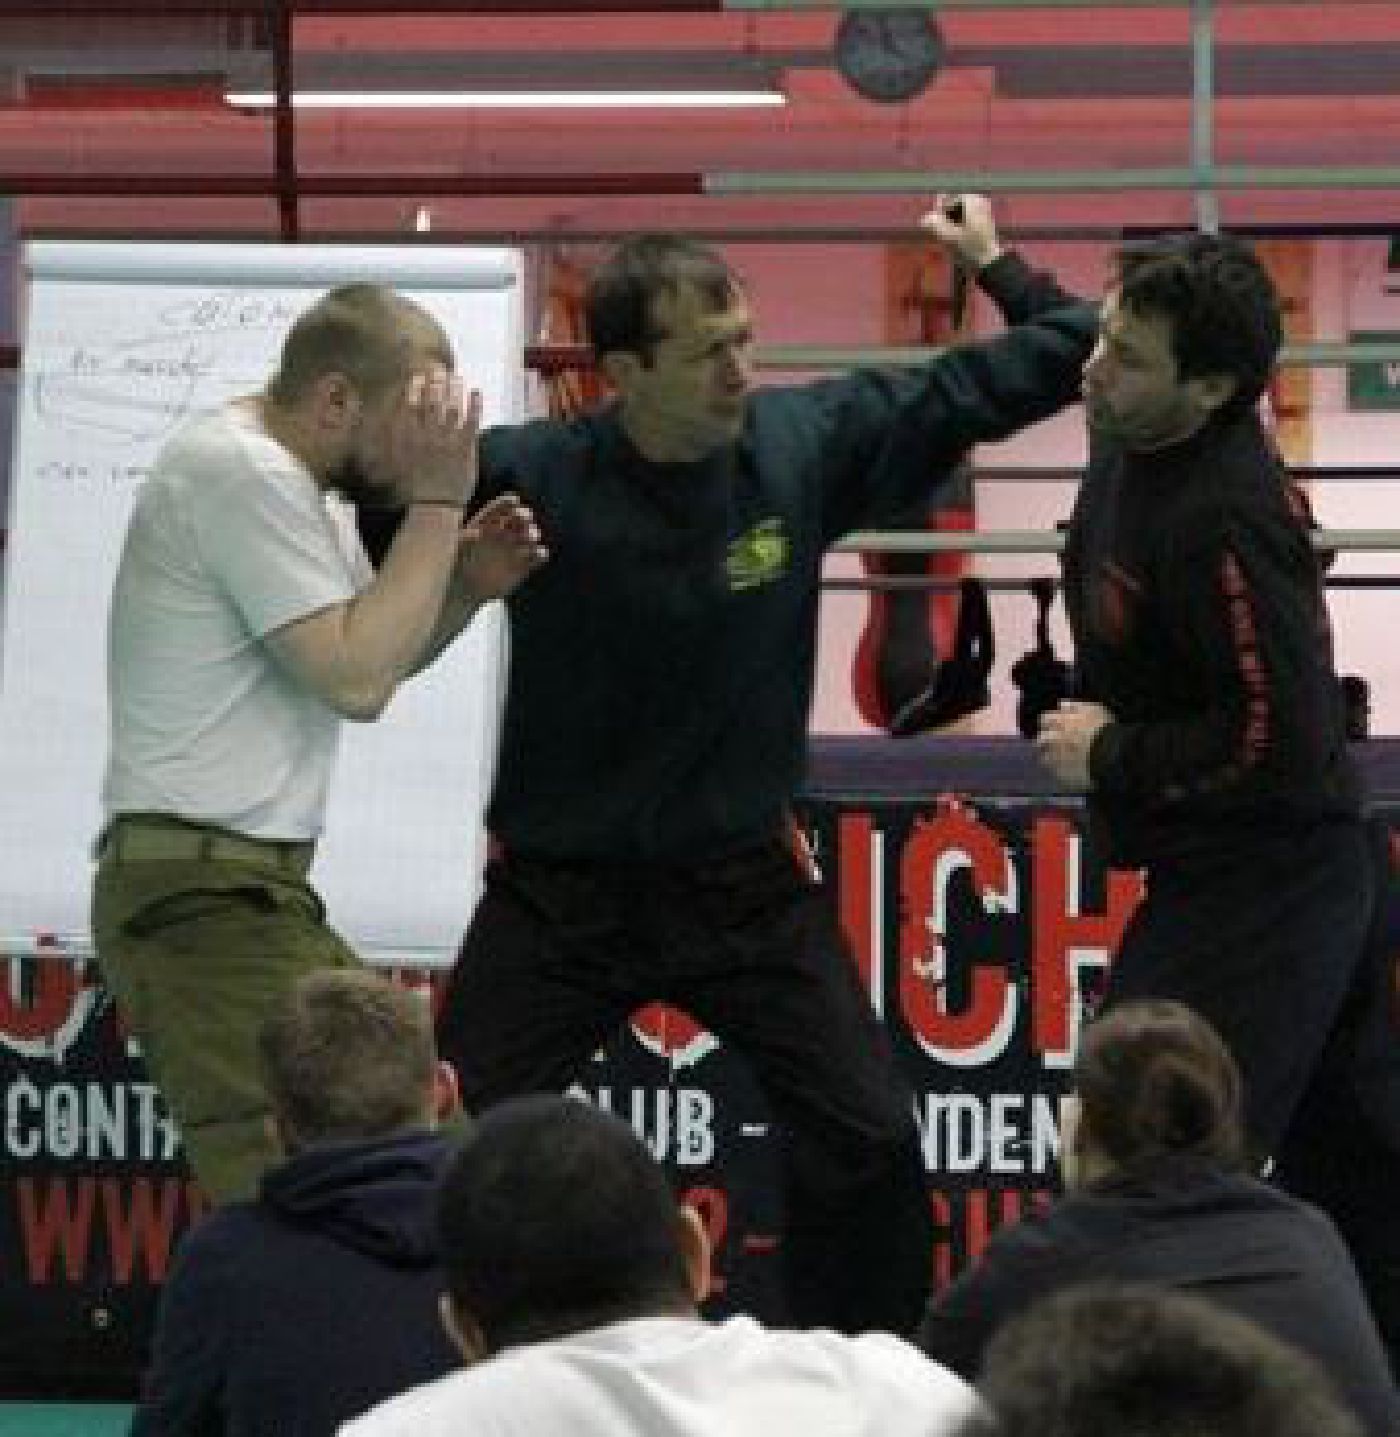 Krav Maga instructor demonstrating how to protect someone from an assailant